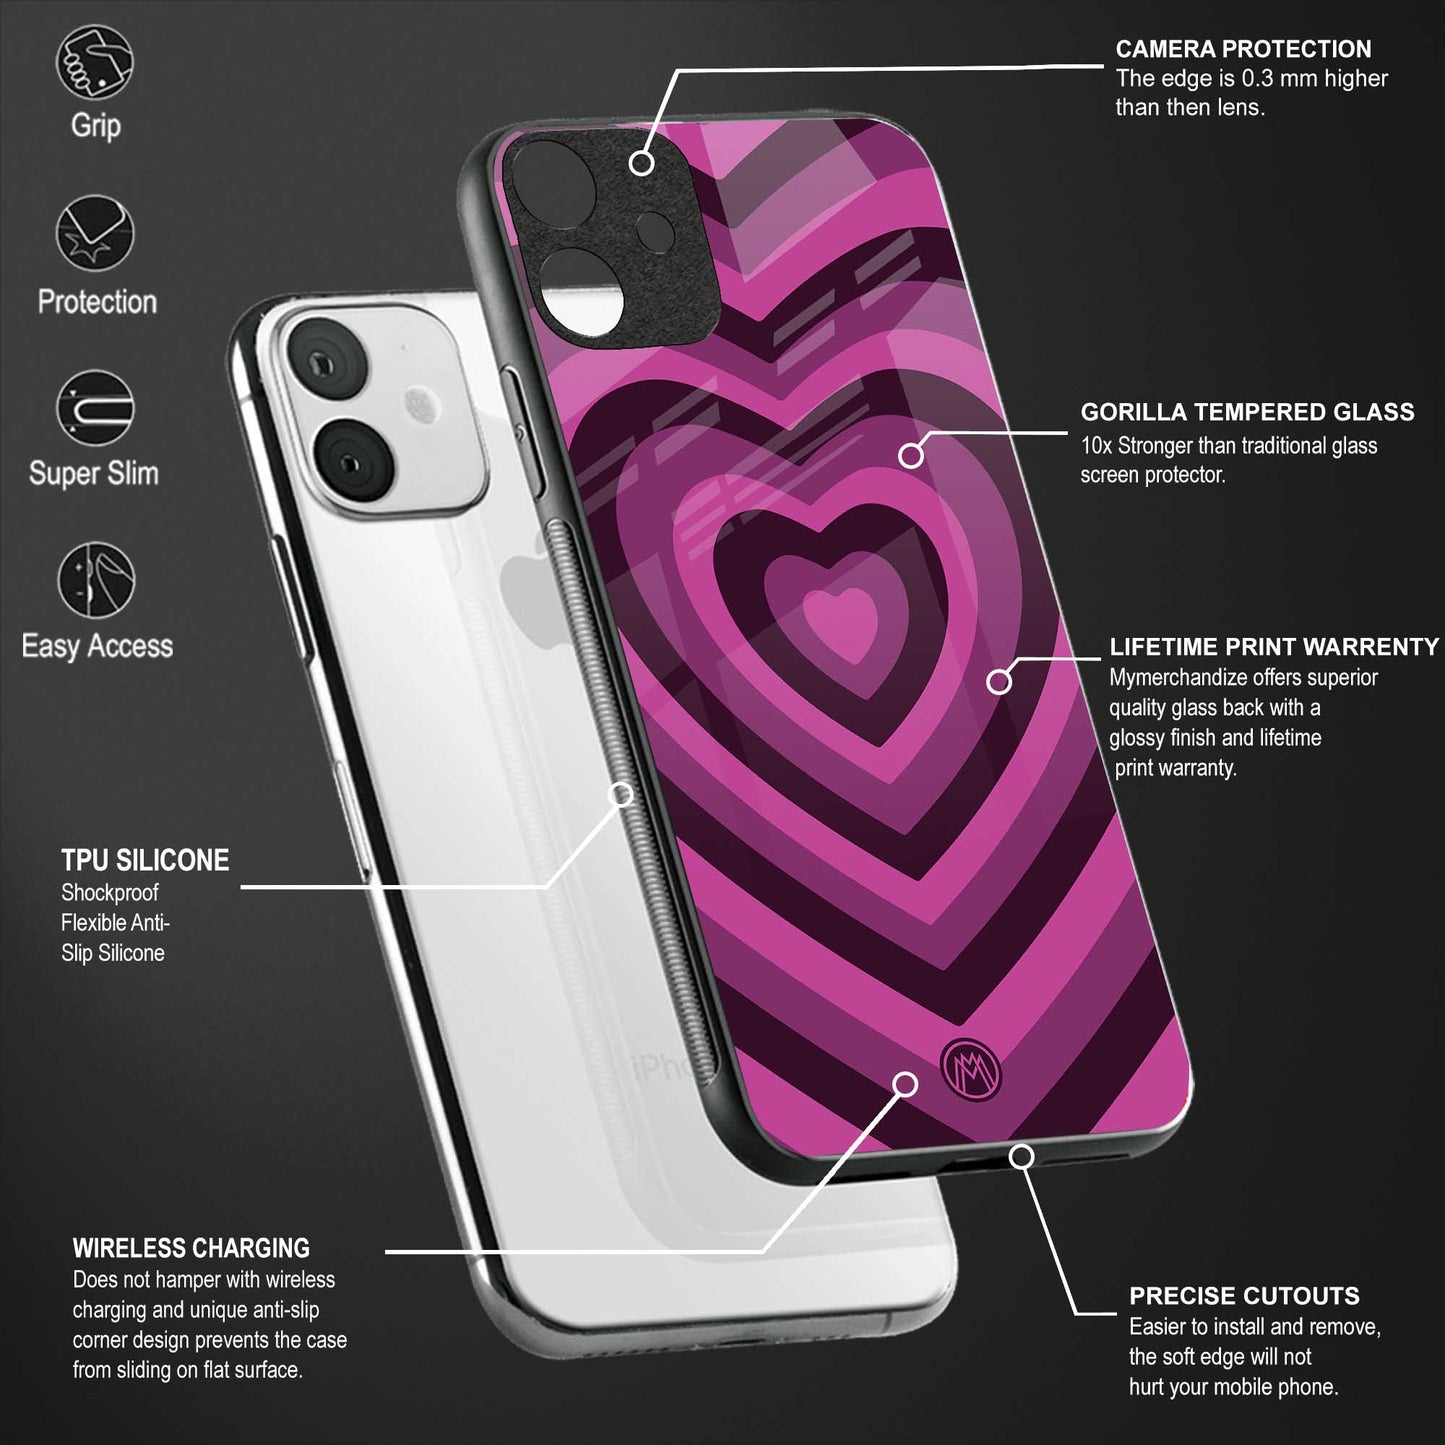 y2k burgundy hearts aesthetic back phone cover | glass case for vivo y72